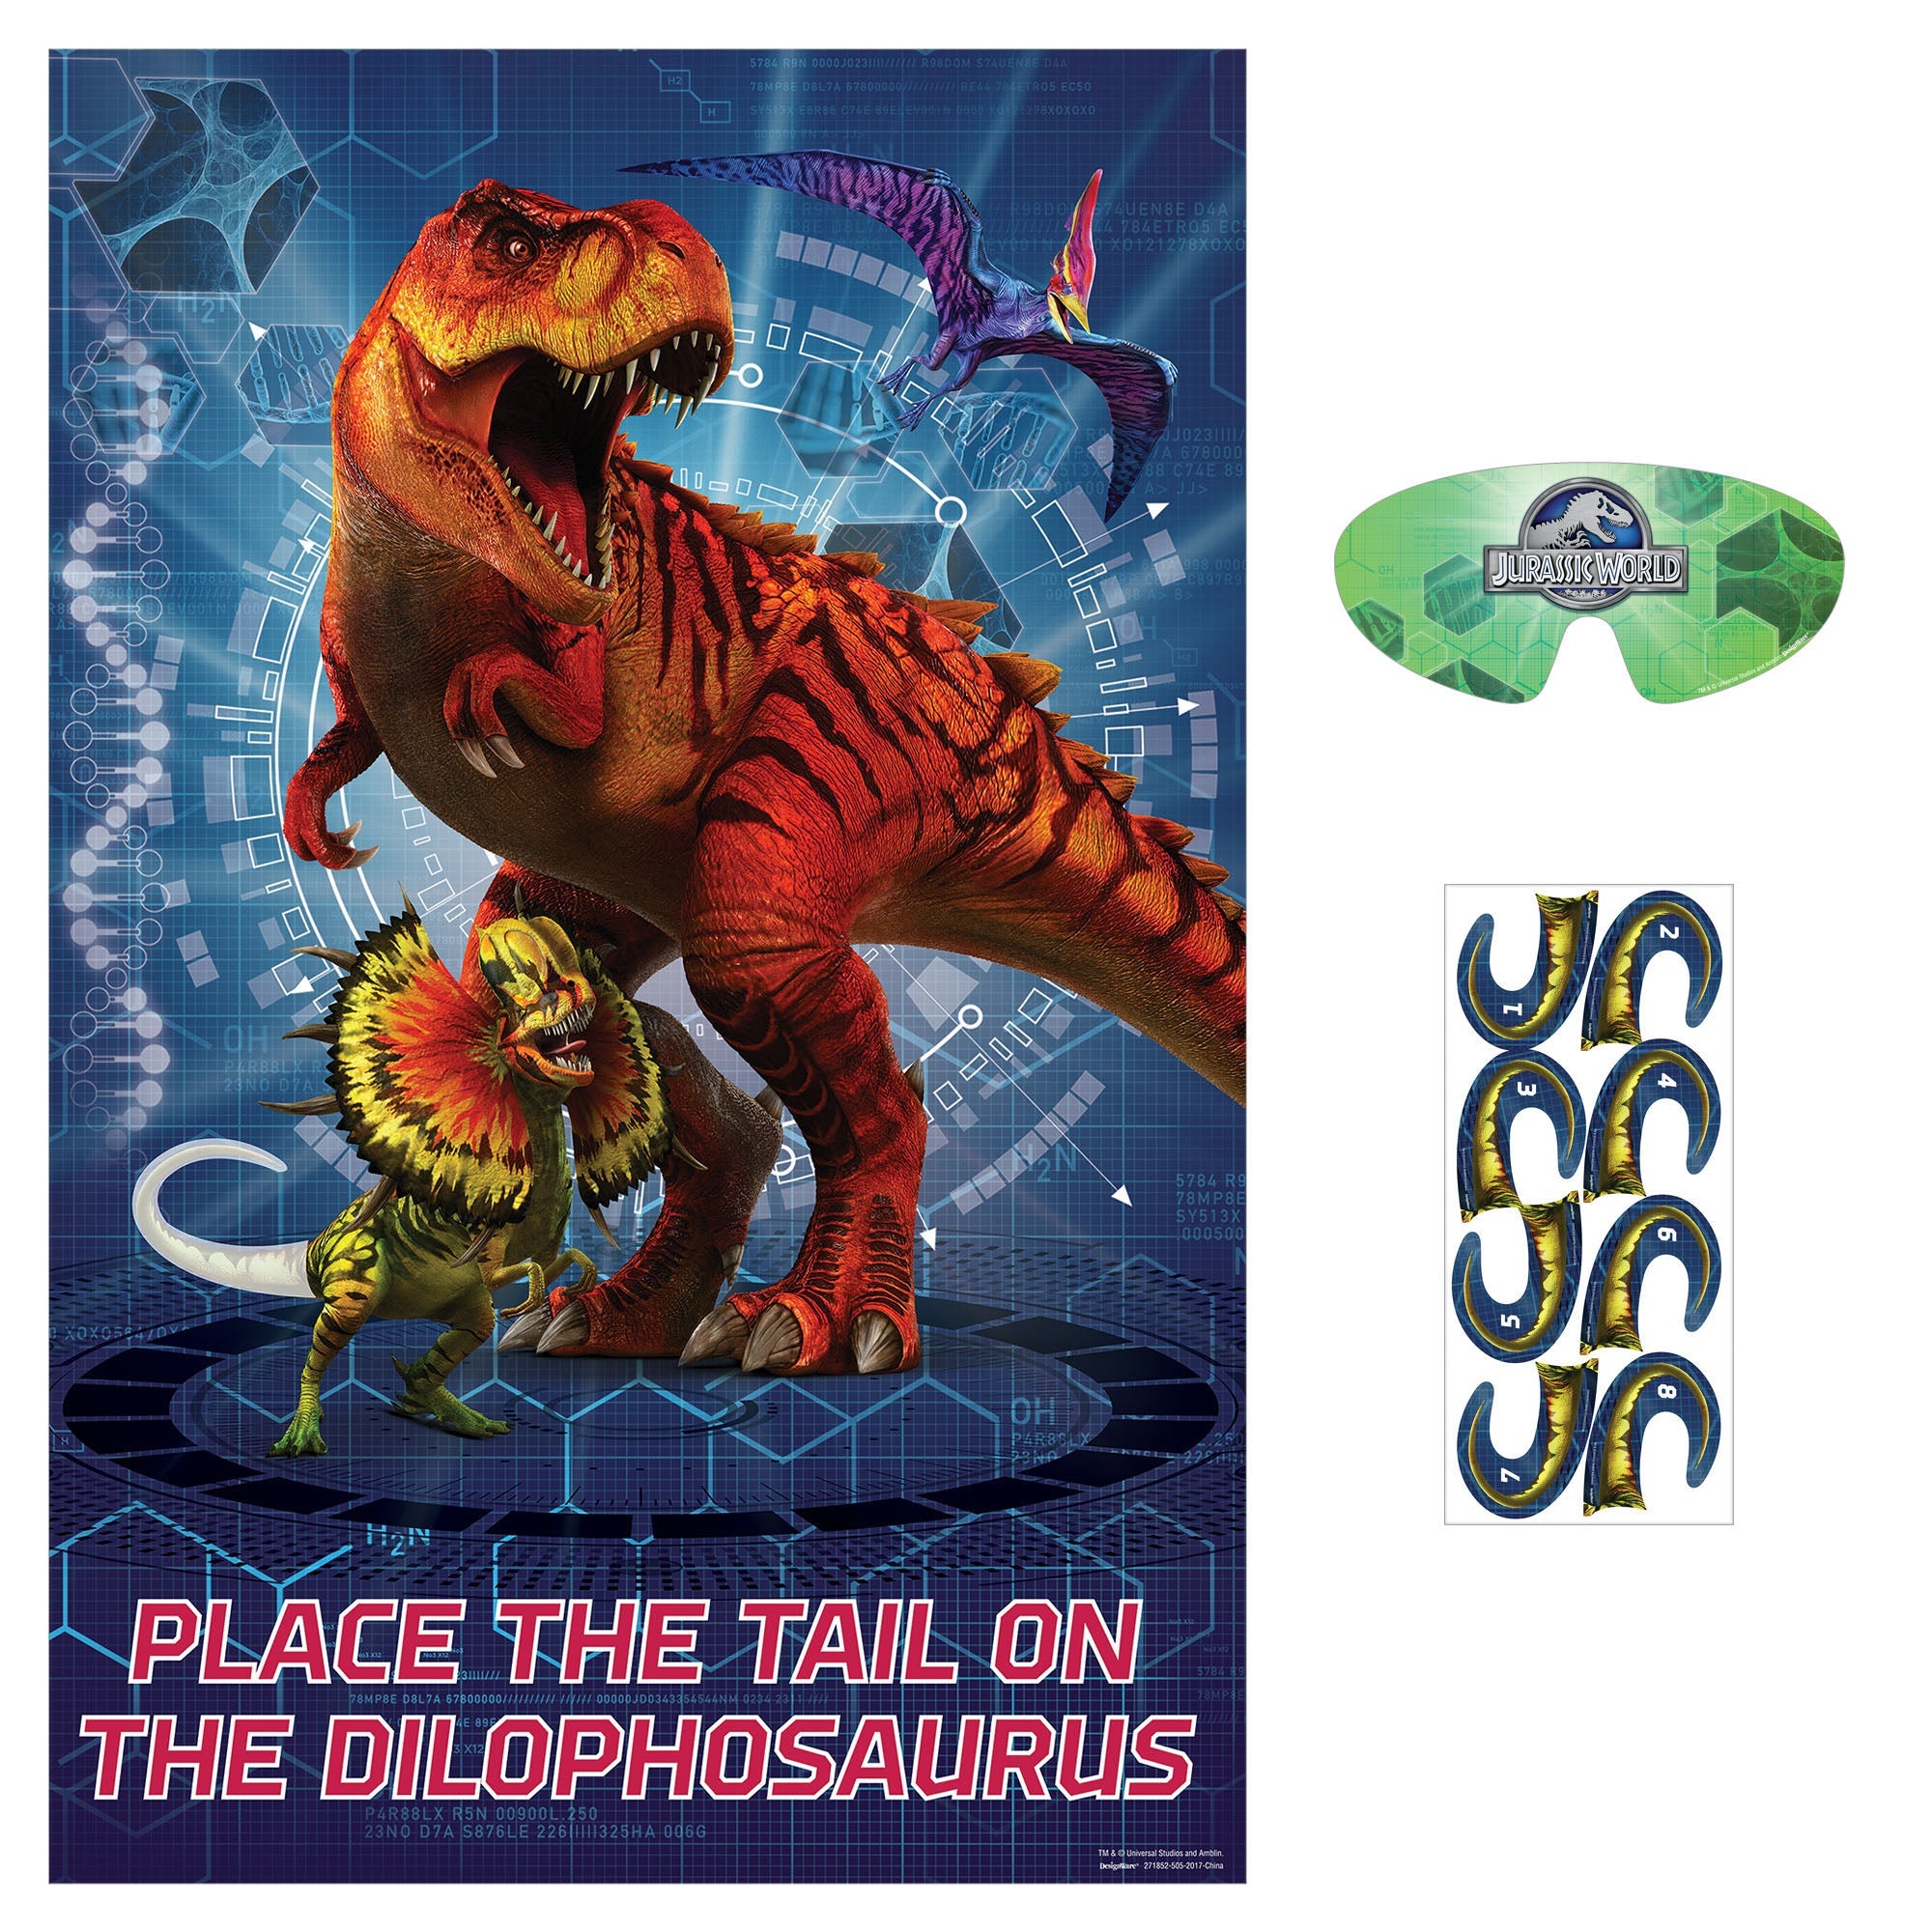 Jurassic World Party Game